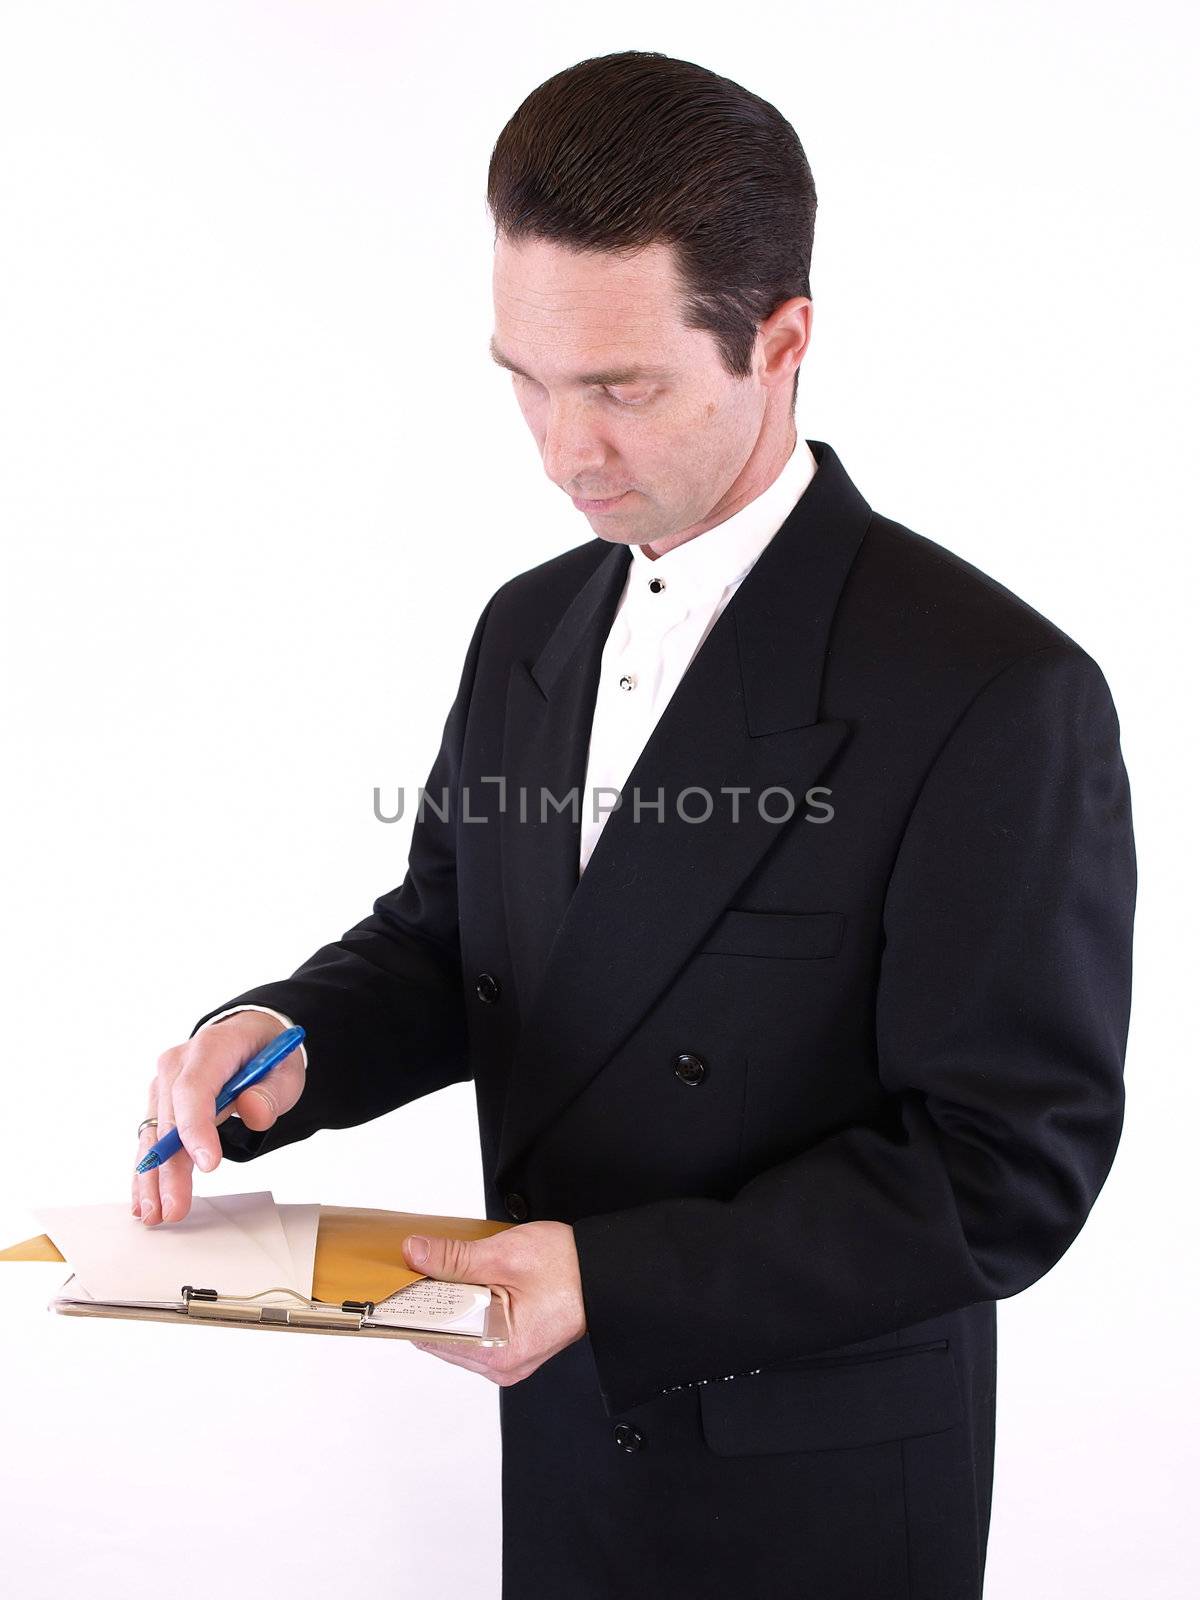 Adult male in a suit holding a clipboard with envelopes and a pen. Isolated on a white background.